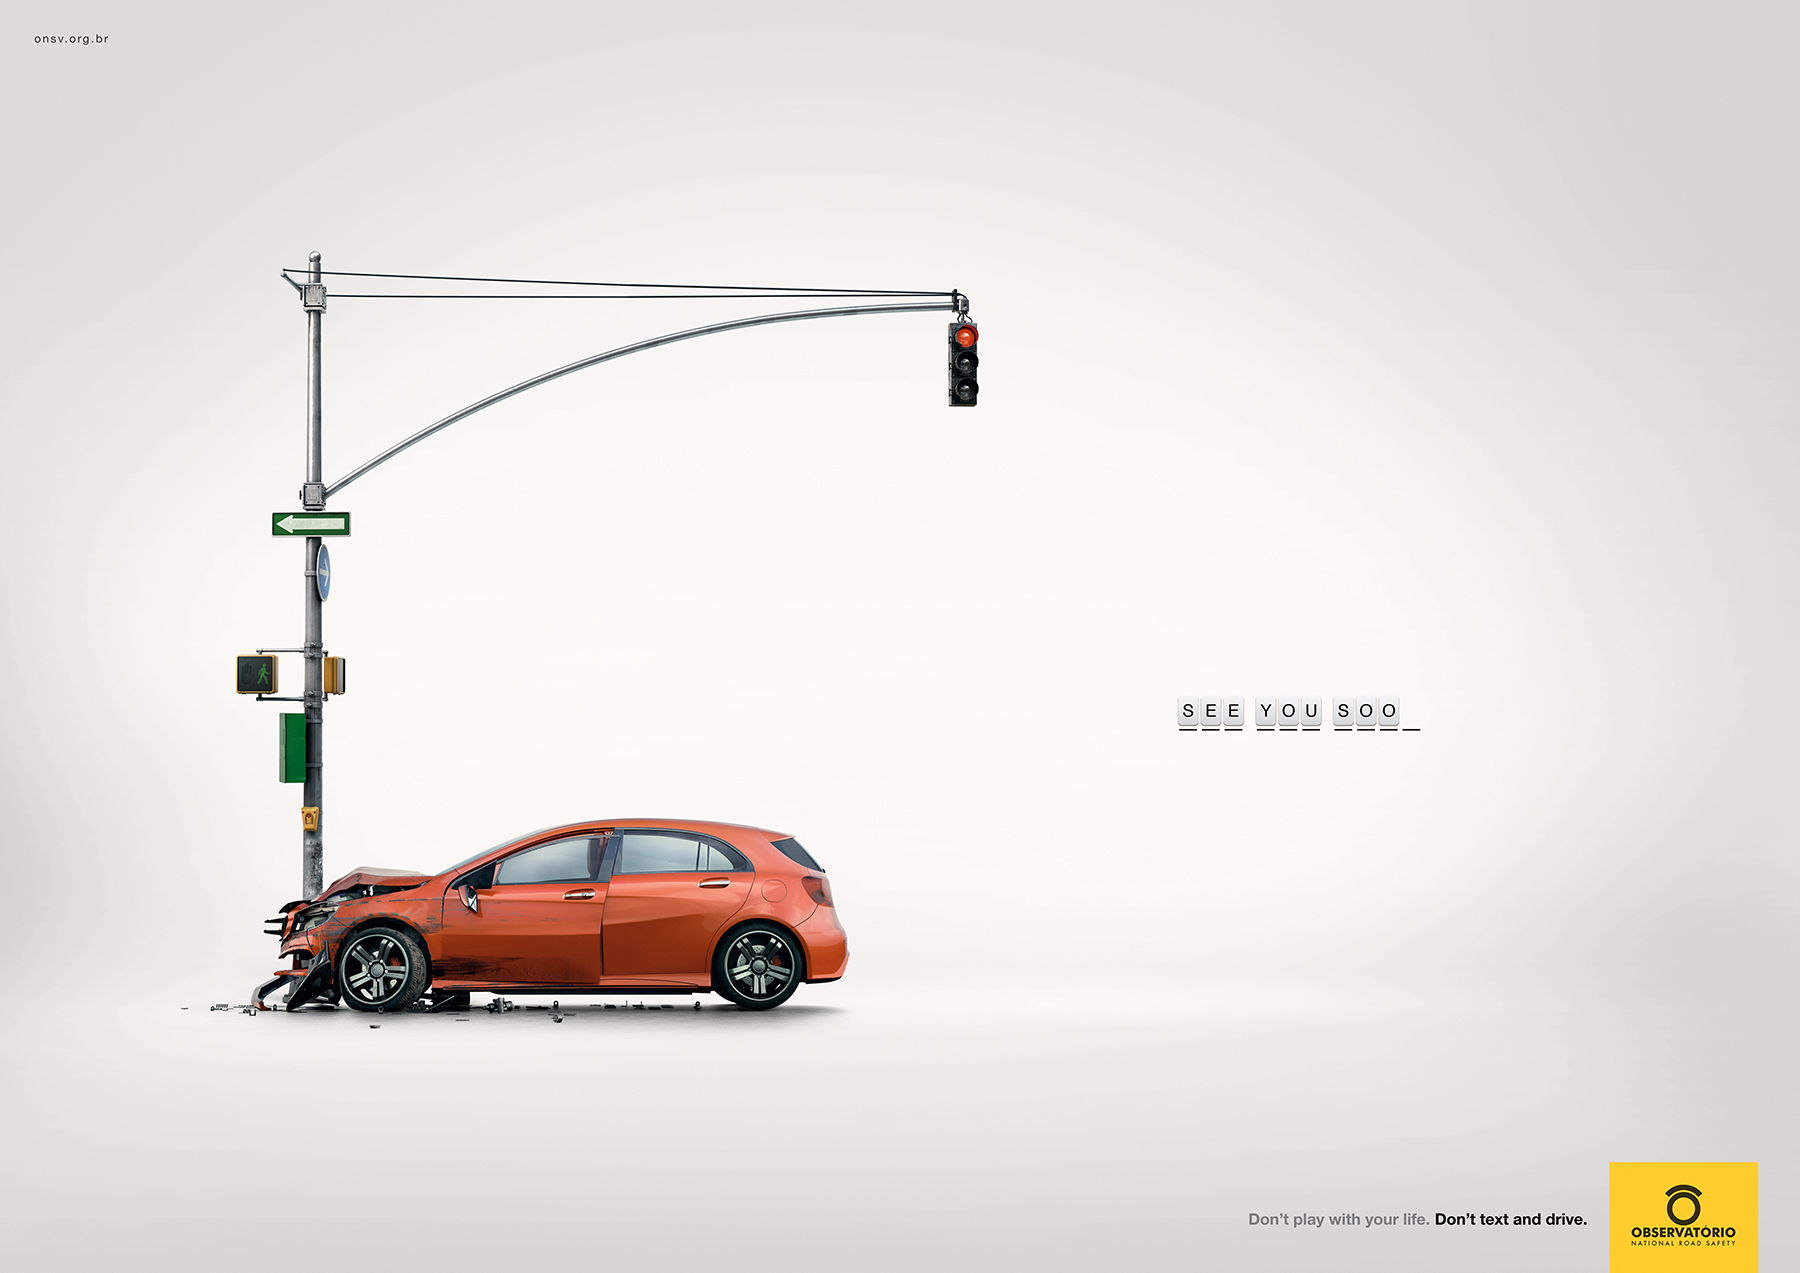 observatorio-national-road-safety-hangman-2-cotw